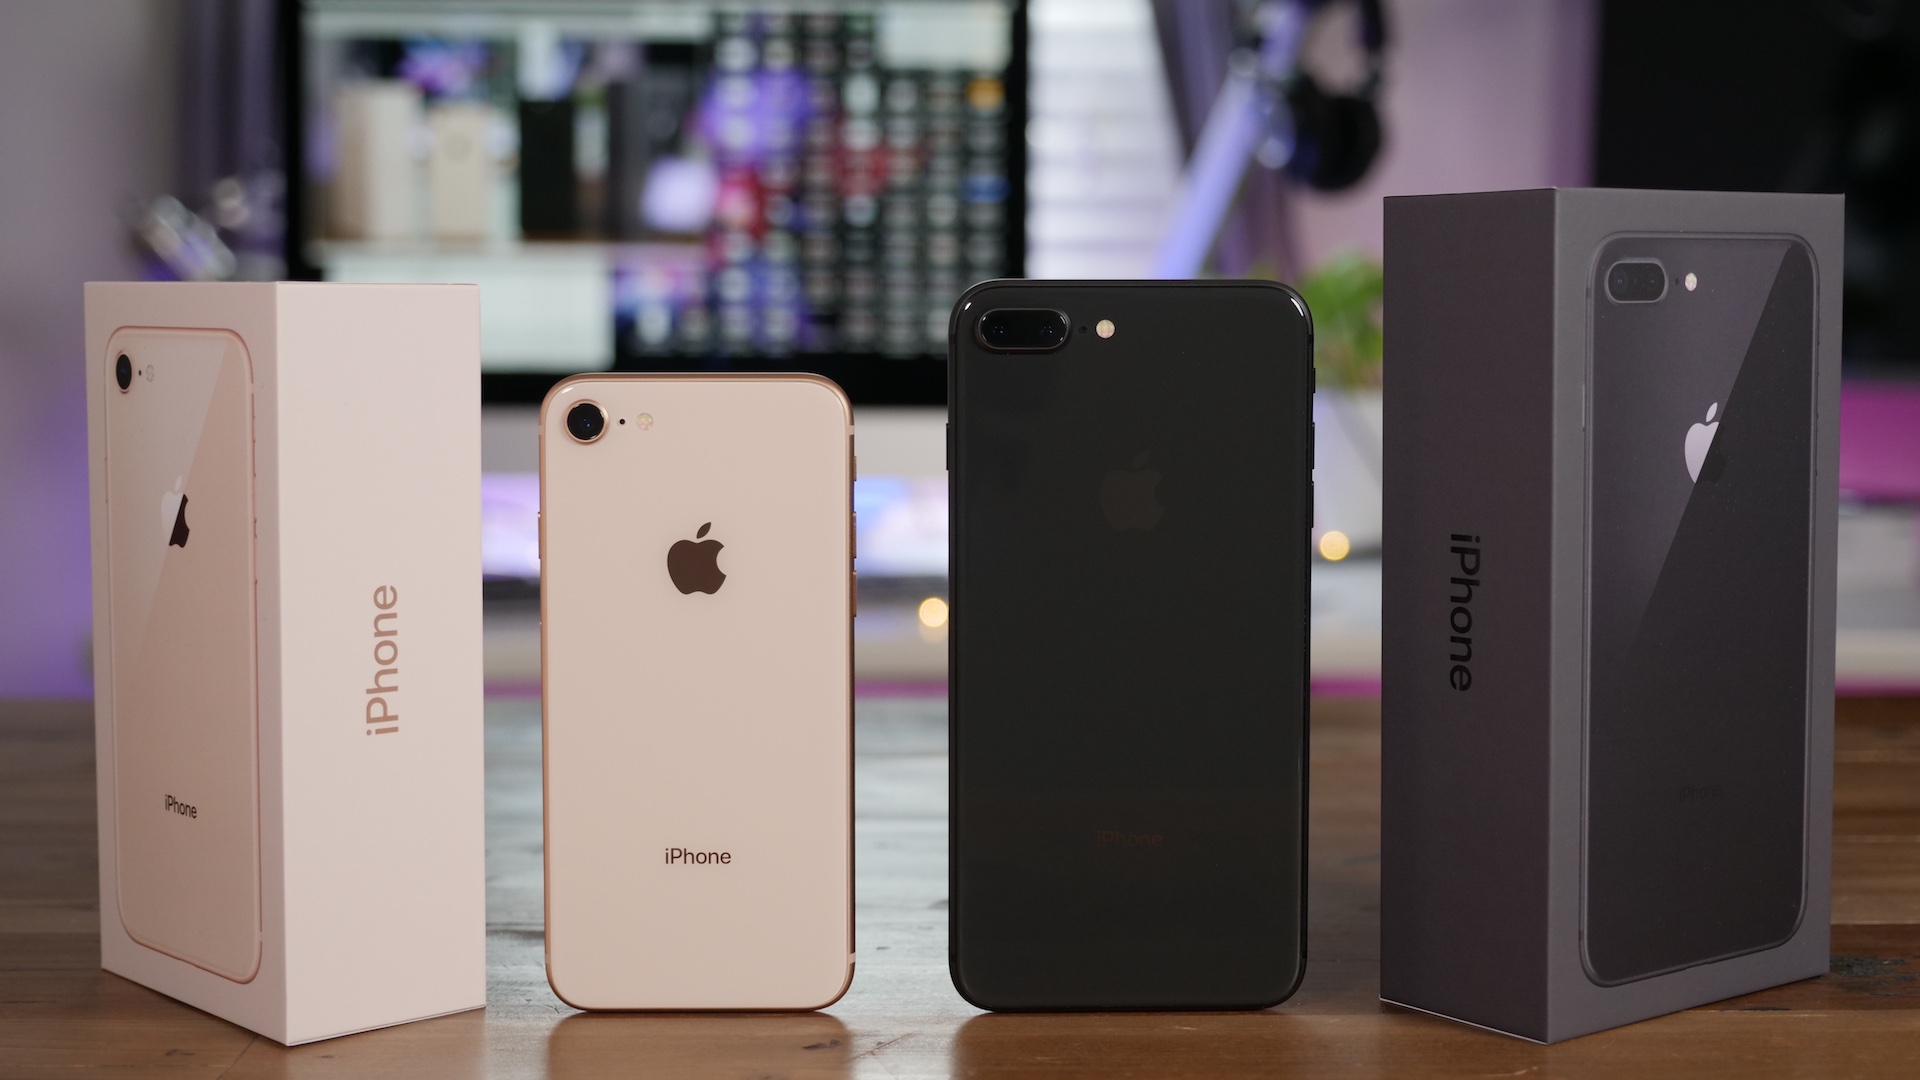 Apple iPhone 8 Plus Reviews, Pros and Cons